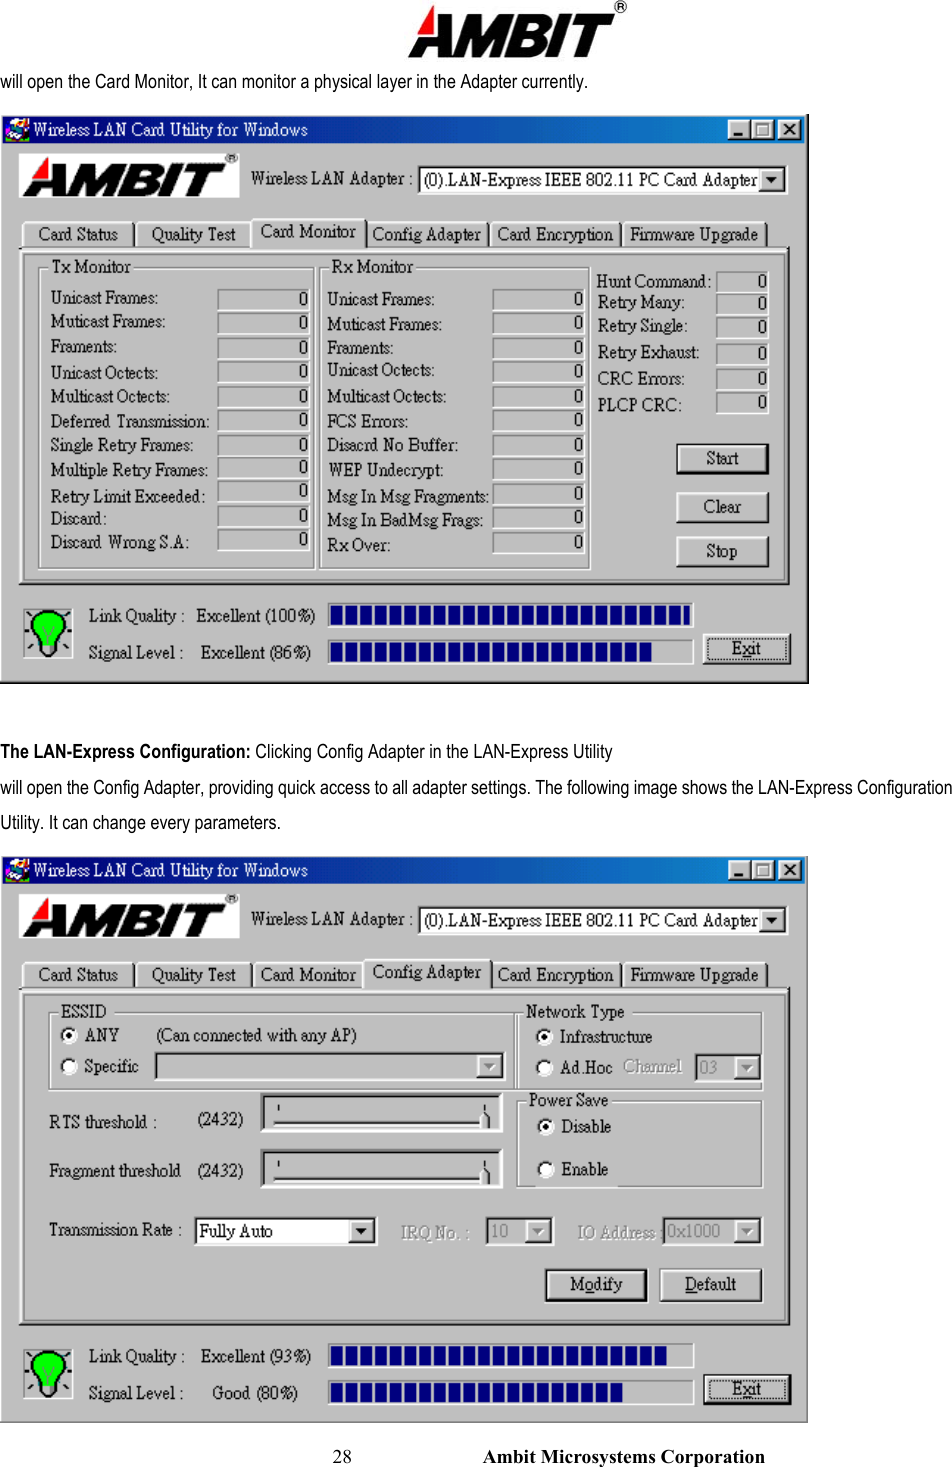                                                                                                          28                           Ambit Microsystems Corporation will open the Card Monitor, It can monitor a physical layer in the Adapter currently.   The LAN-Express Configuration: Clicking Config Adapter in the LAN-Express Utility will open the Config Adapter, providing quick access to all adapter settings. The following image shows the LAN-Express Configuration Utility. It can change every parameters.  